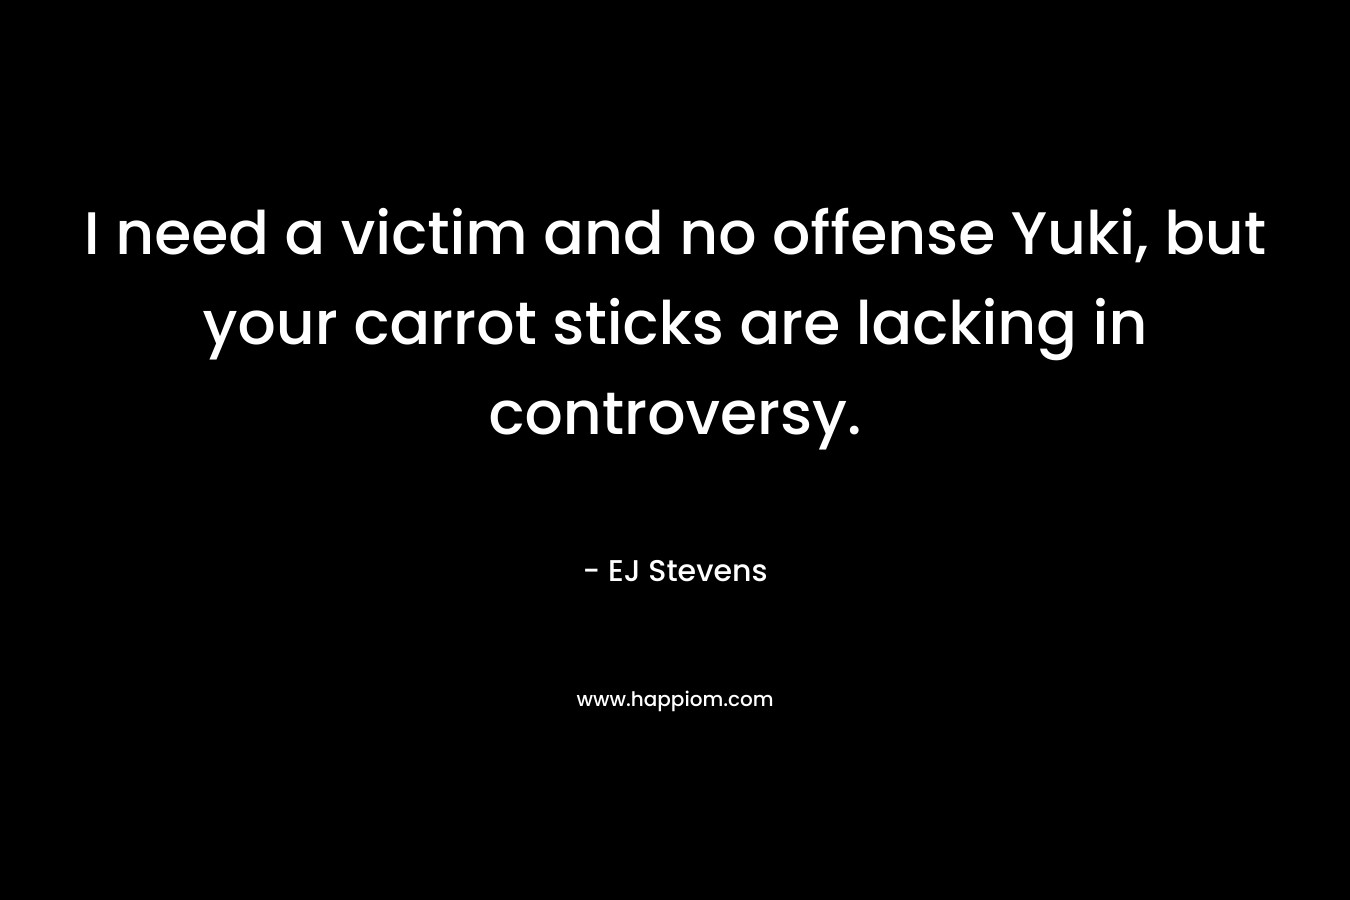 I need a victim and no offense Yuki, but your carrot sticks are lacking in controversy. – EJ Stevens